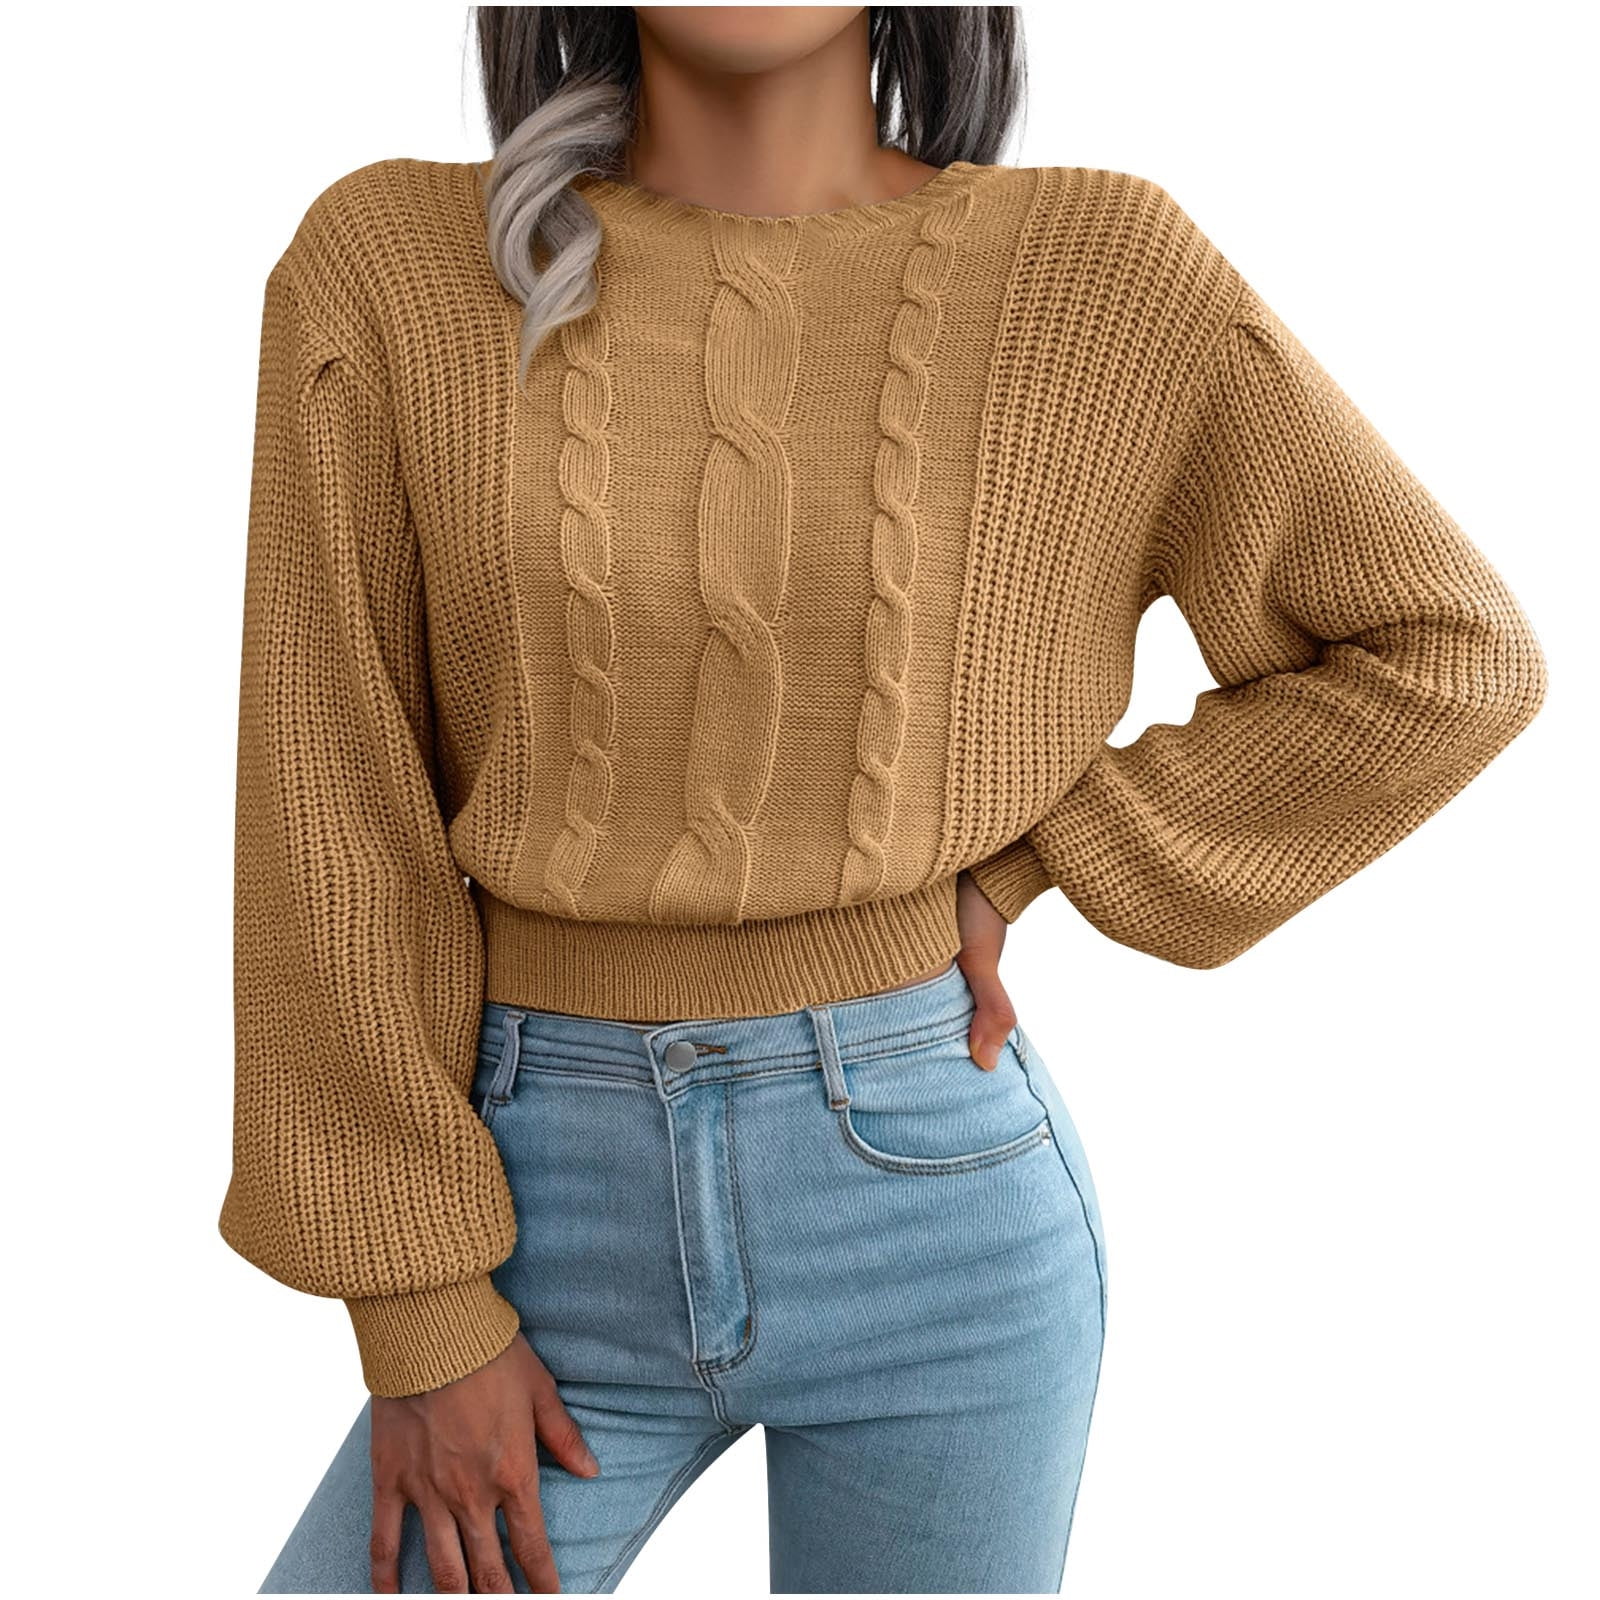 HTNBO Cute Cropped Sweaters for Juniors Casual Fall Chunky Printed Long  Sleeve Crewneck Sweater for Women 